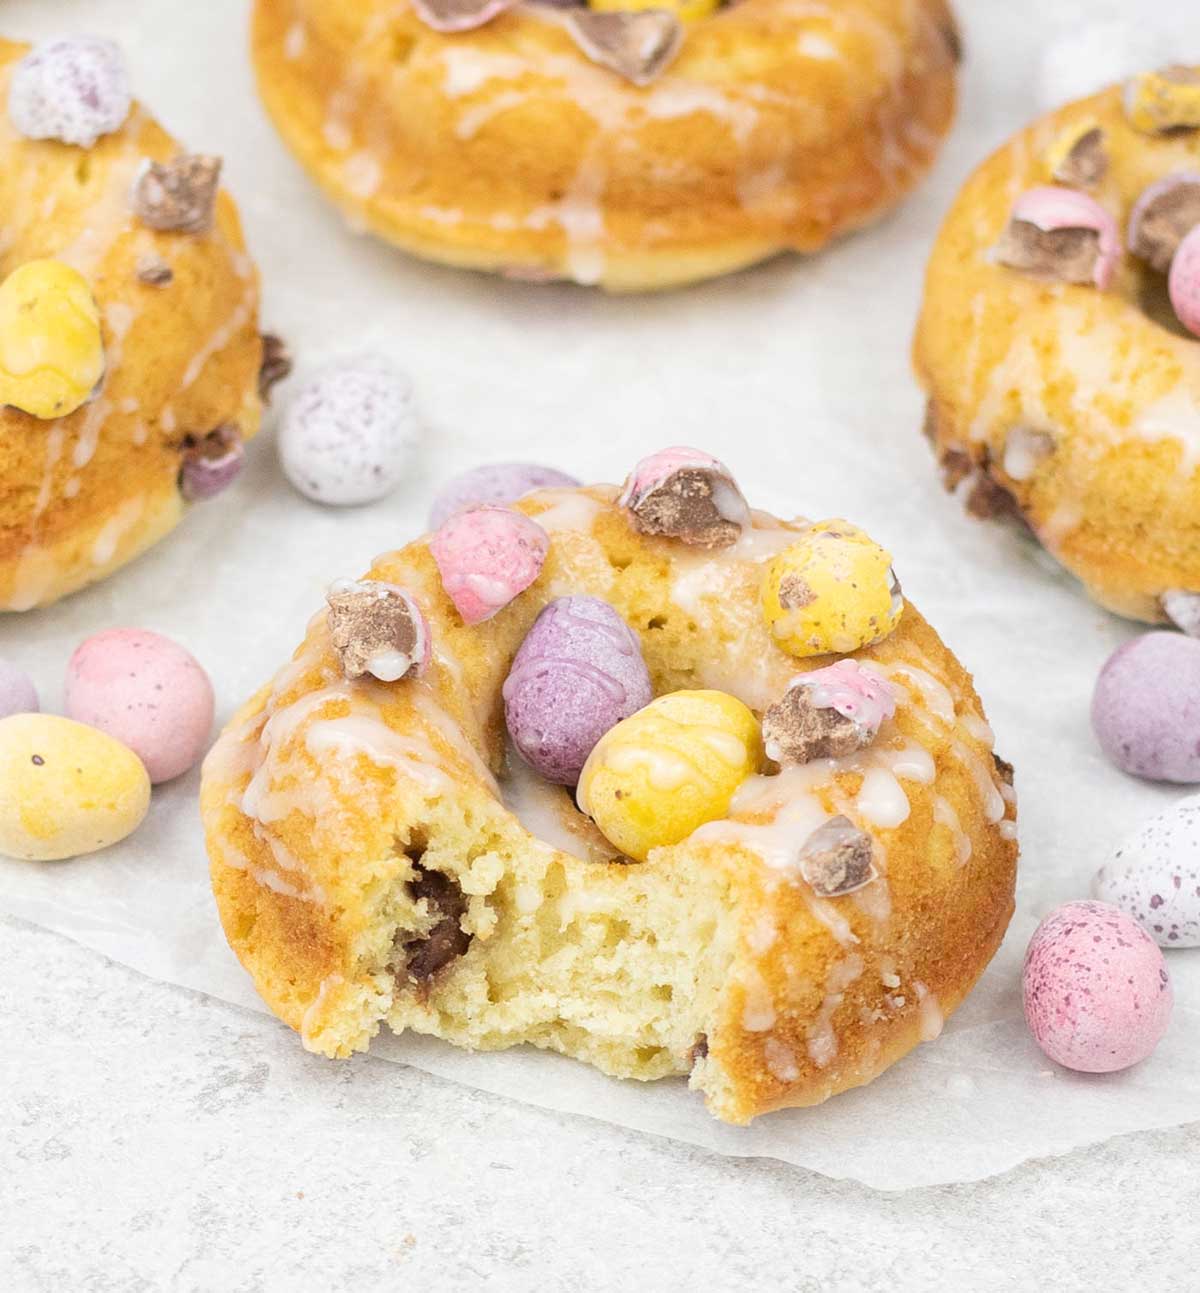 Eat one of the baked Easter donuts with mini eggs.